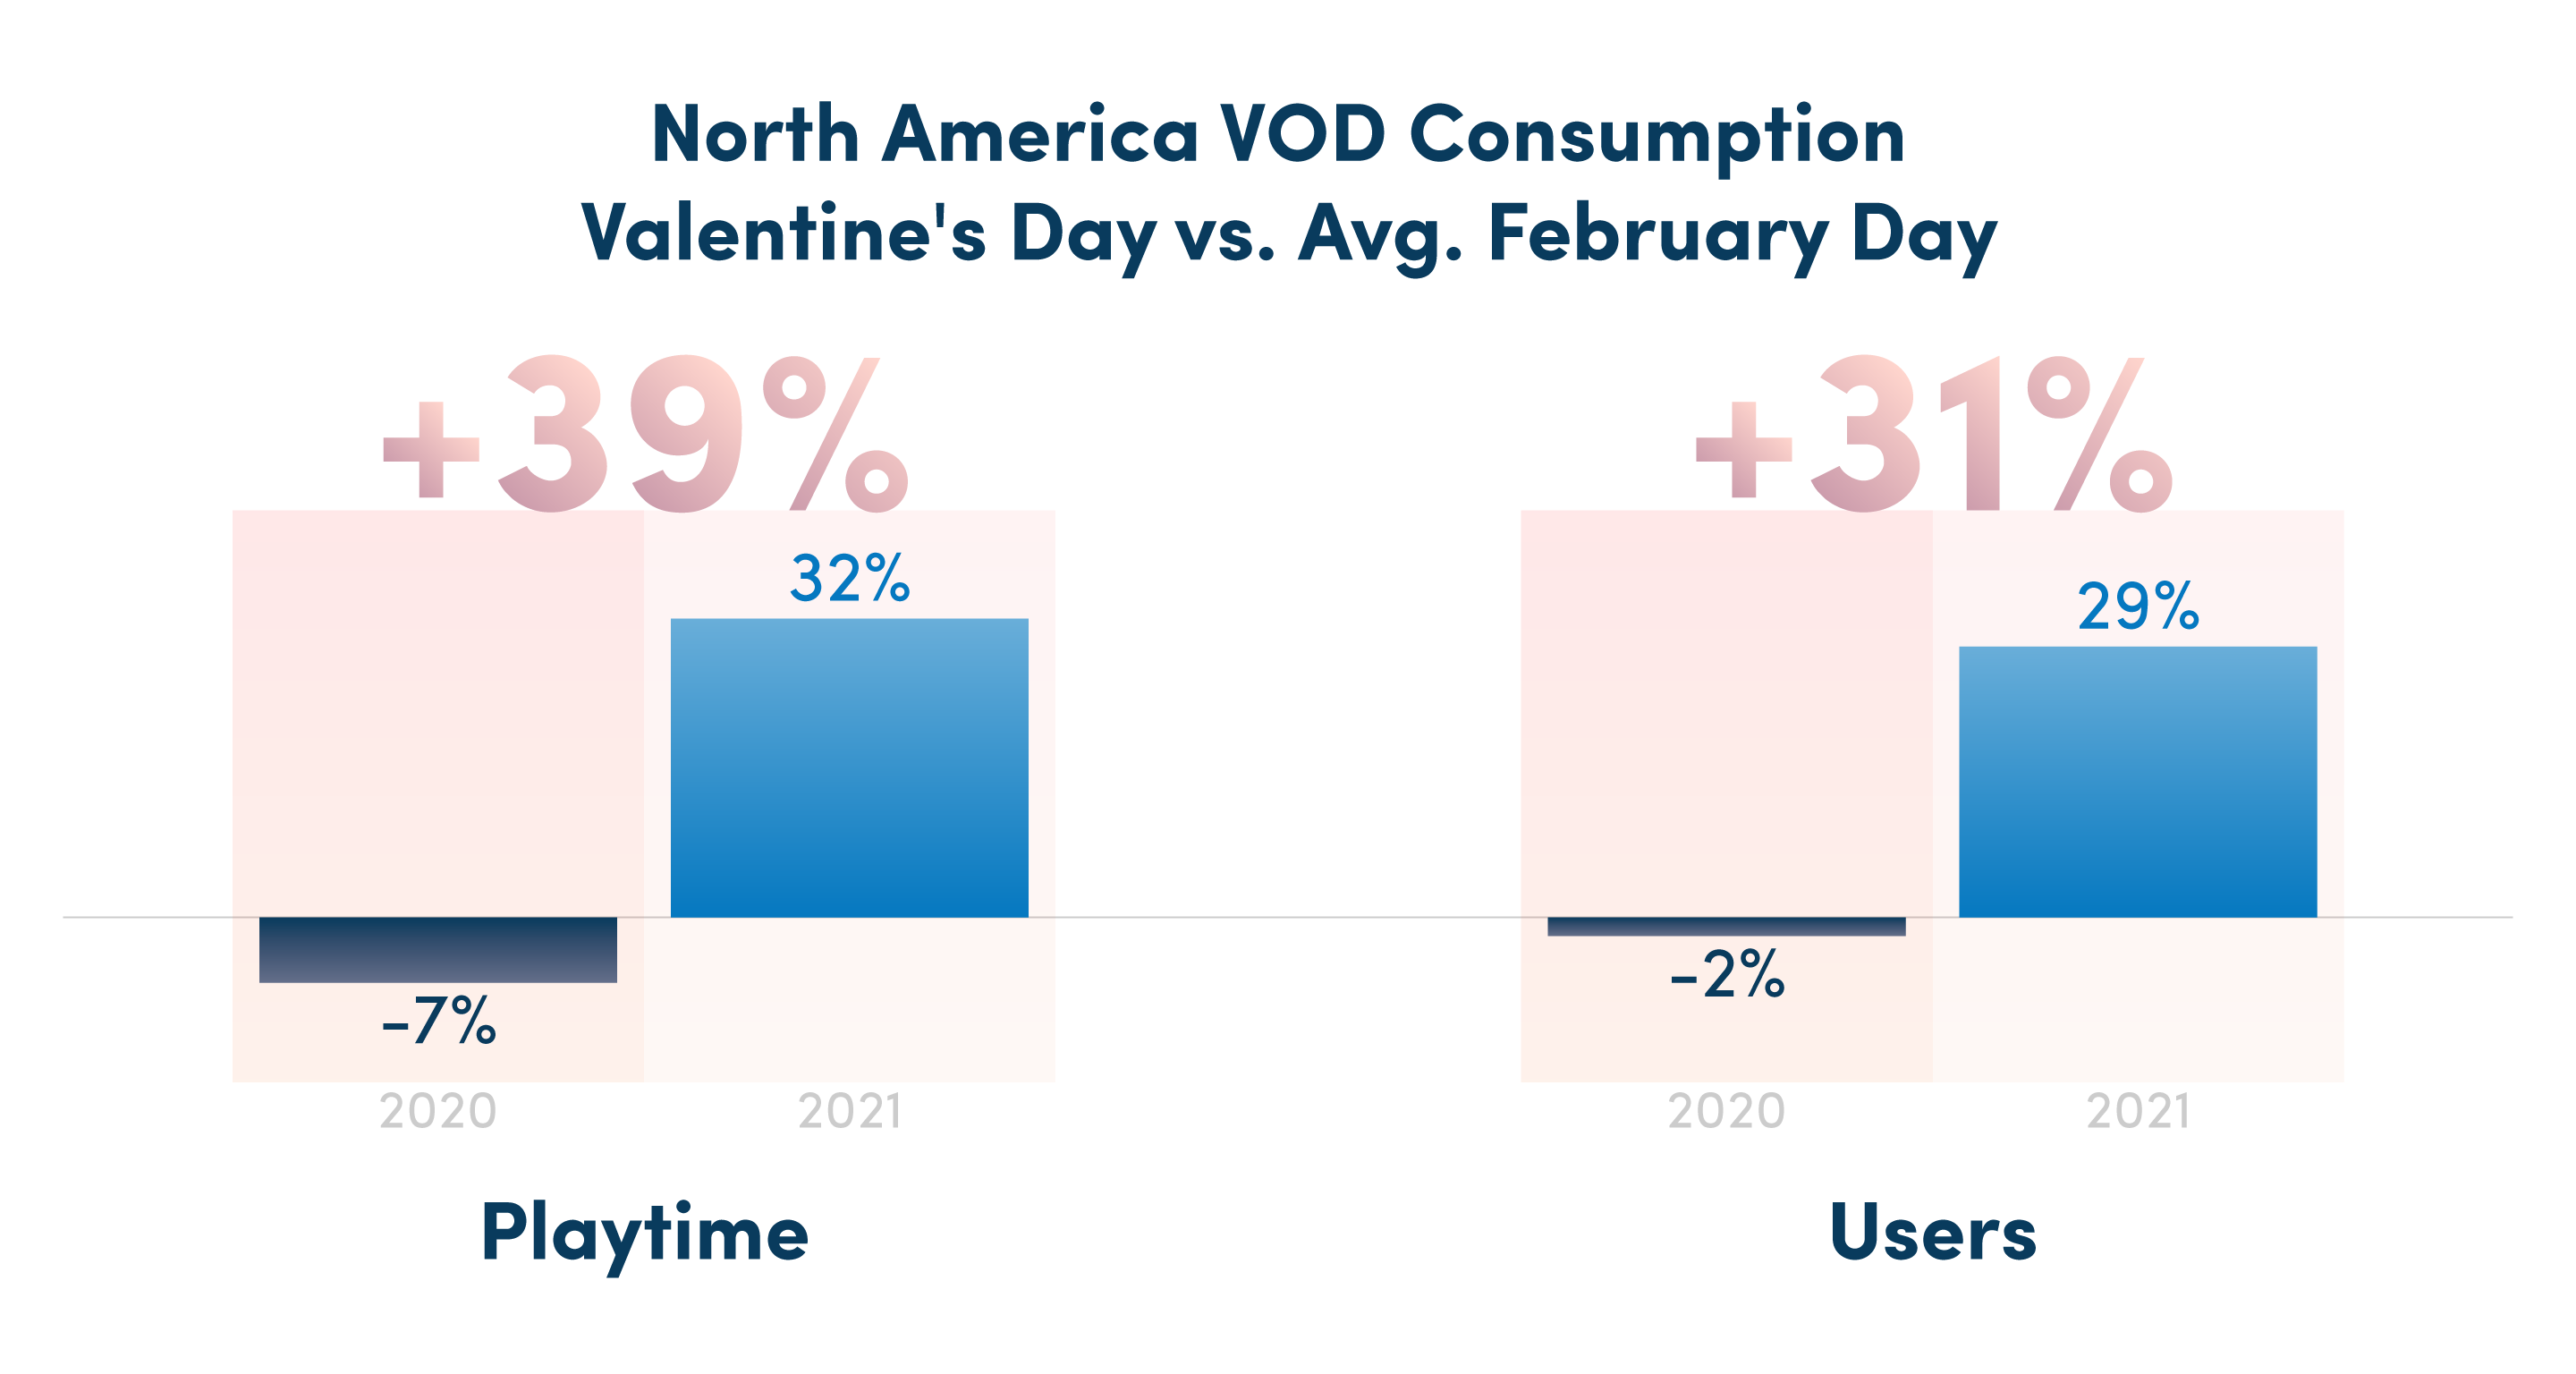 Valentine's day vod consumption up in 2021